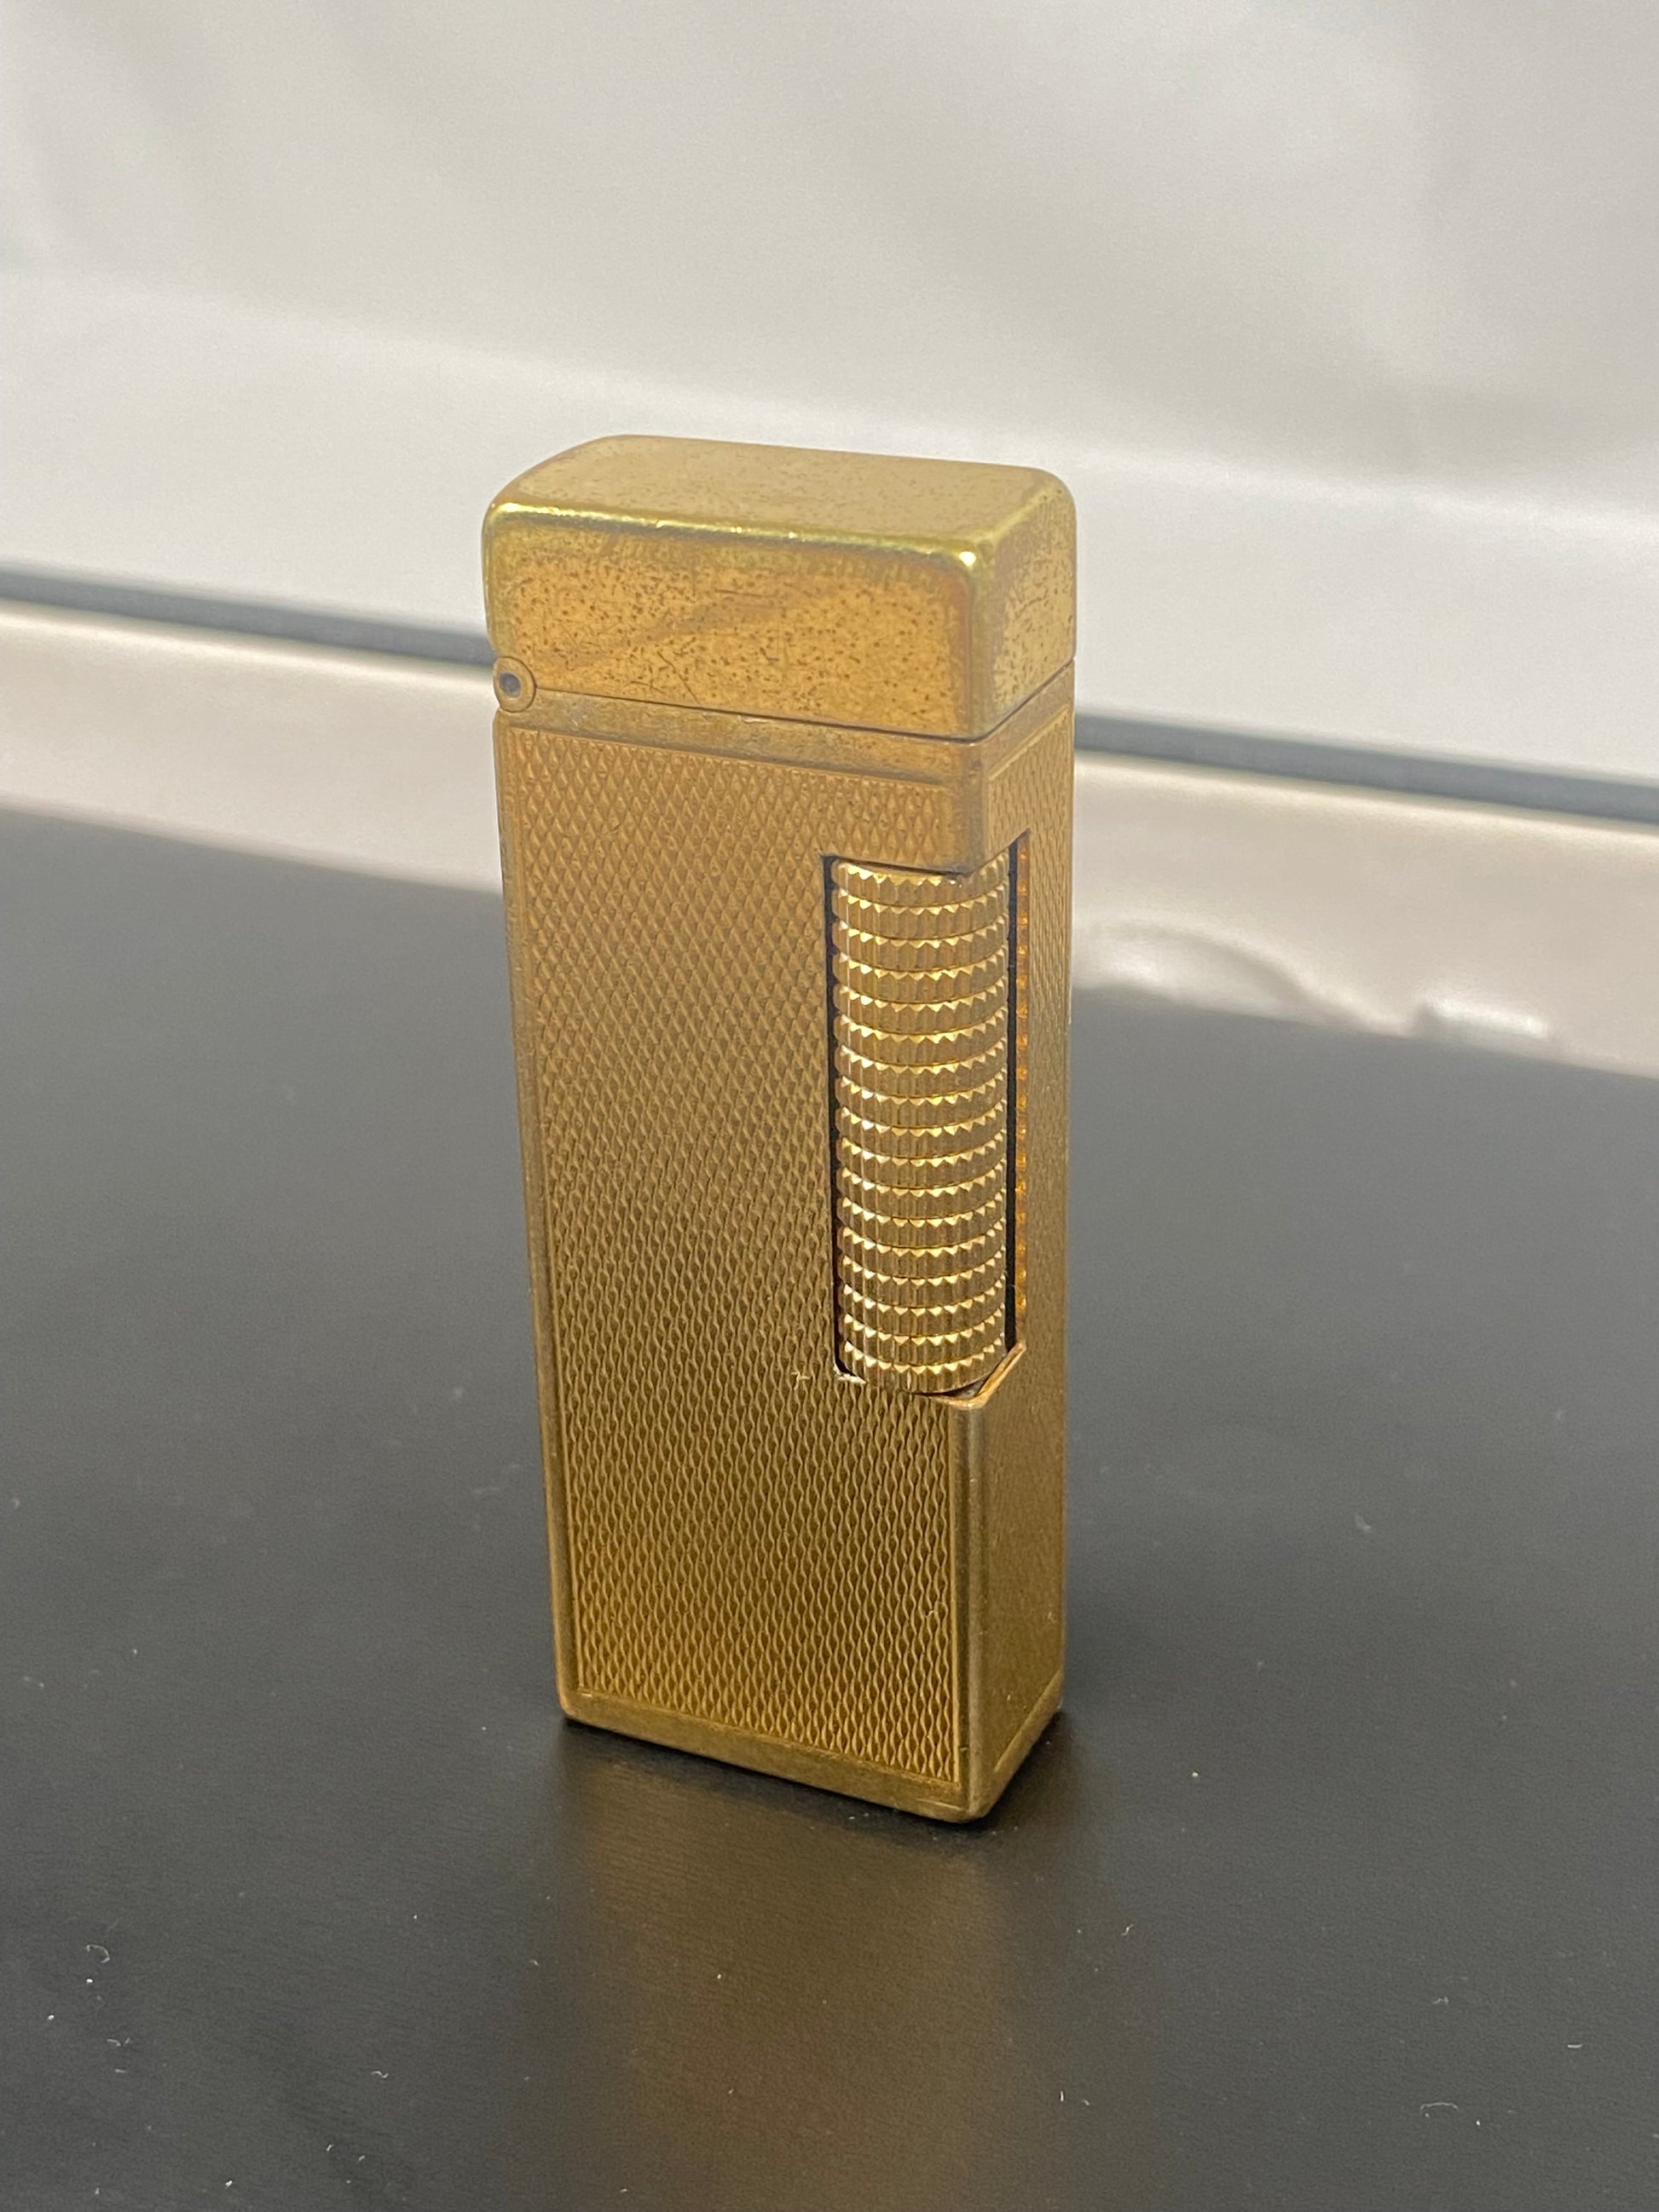 Iconic and Rare Vintage Rollagas Dunhill Gold-Plated Luxury Lighter, 1956-1960 Model, as seen in Bond | Cache Antiques cacheantiquessydney